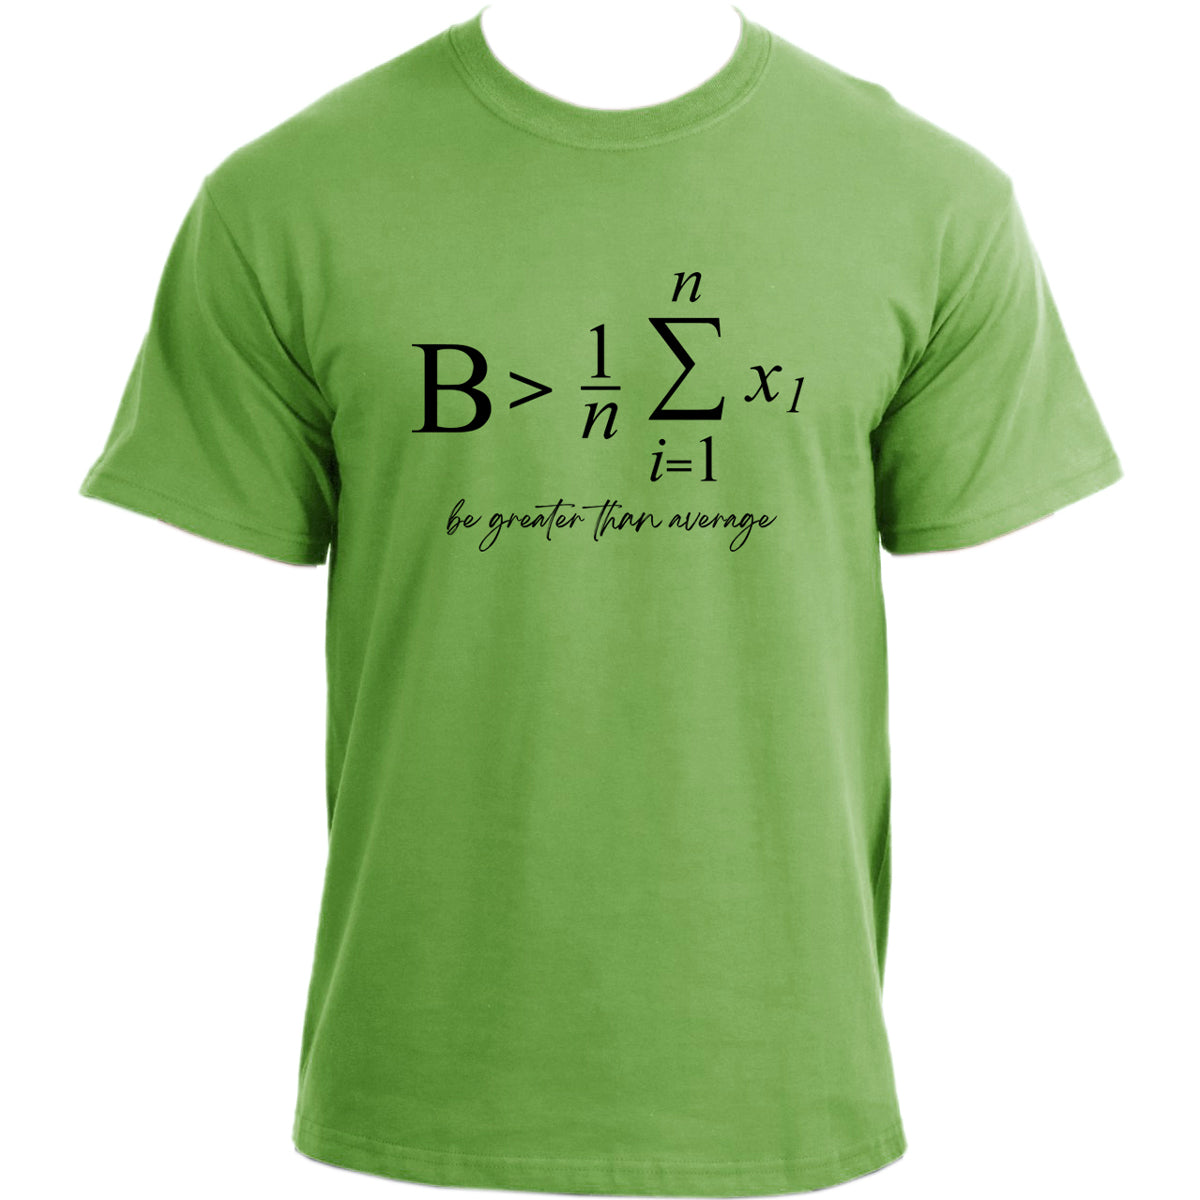 Be Greater Than Average Equation T-Shirt: Nerd Geek Chemistry Math Physics Tee